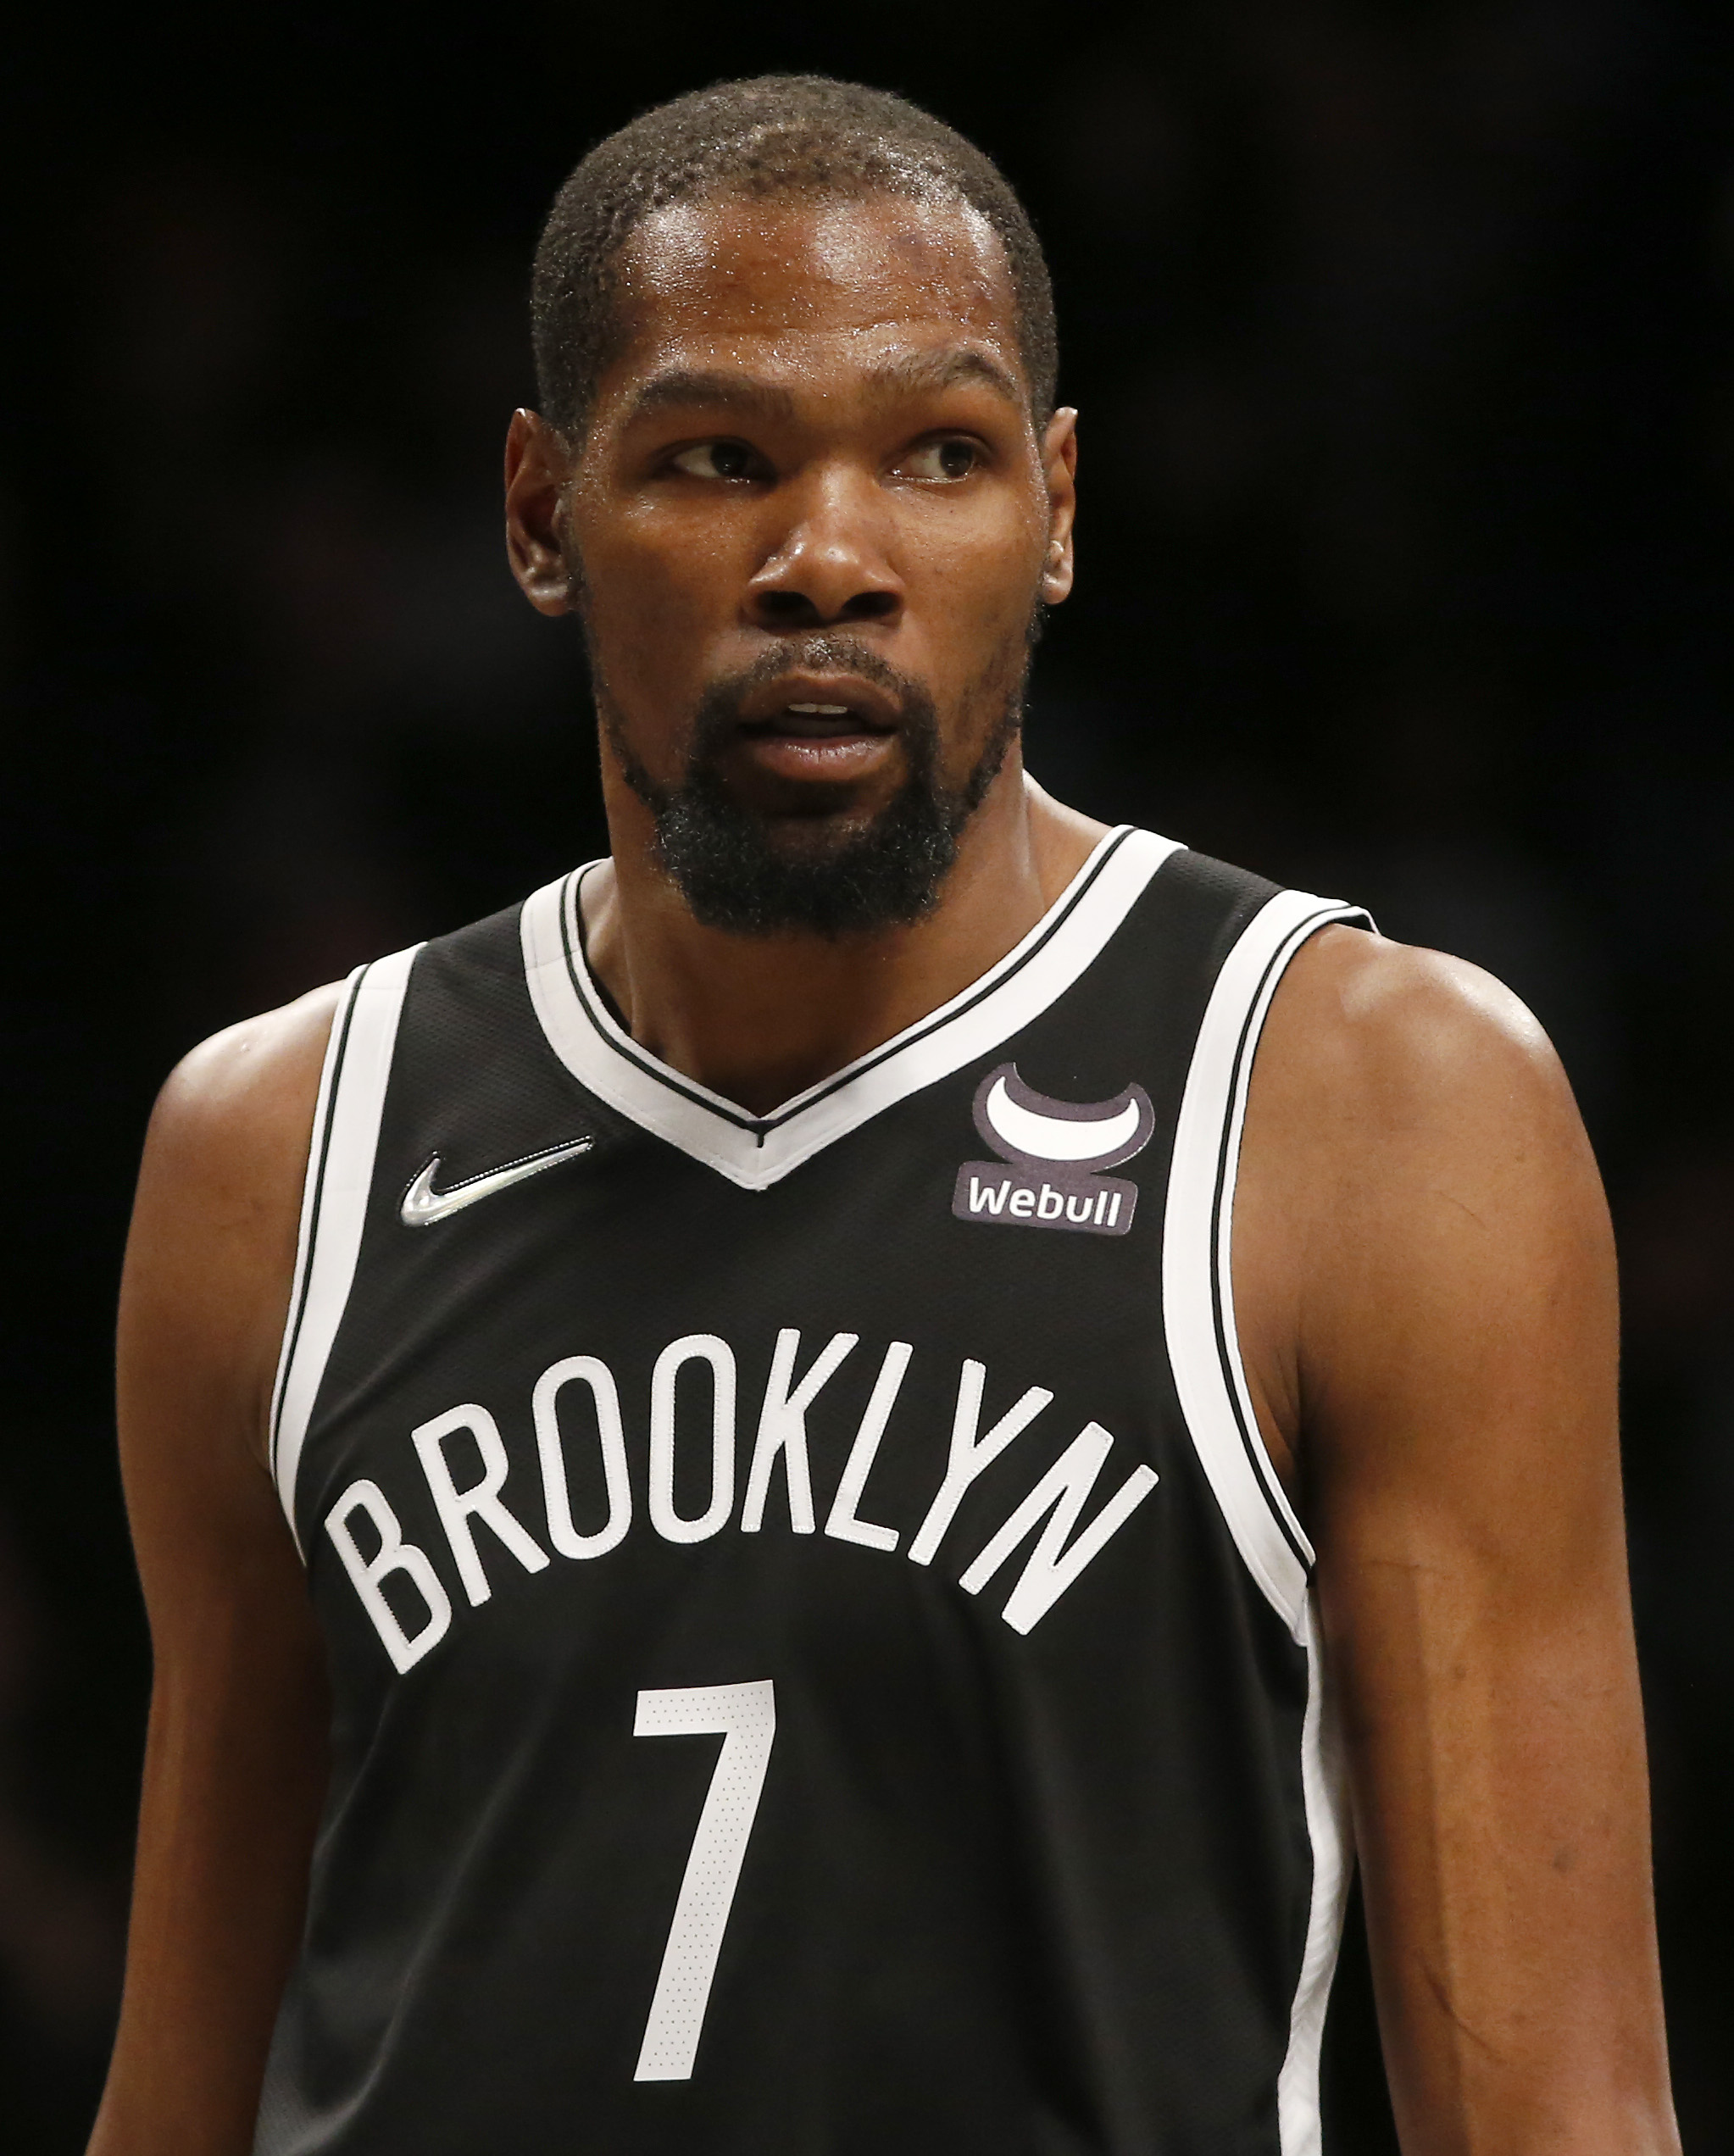 Kevin Durant swats retirement rumor: 'S--- is comical at this